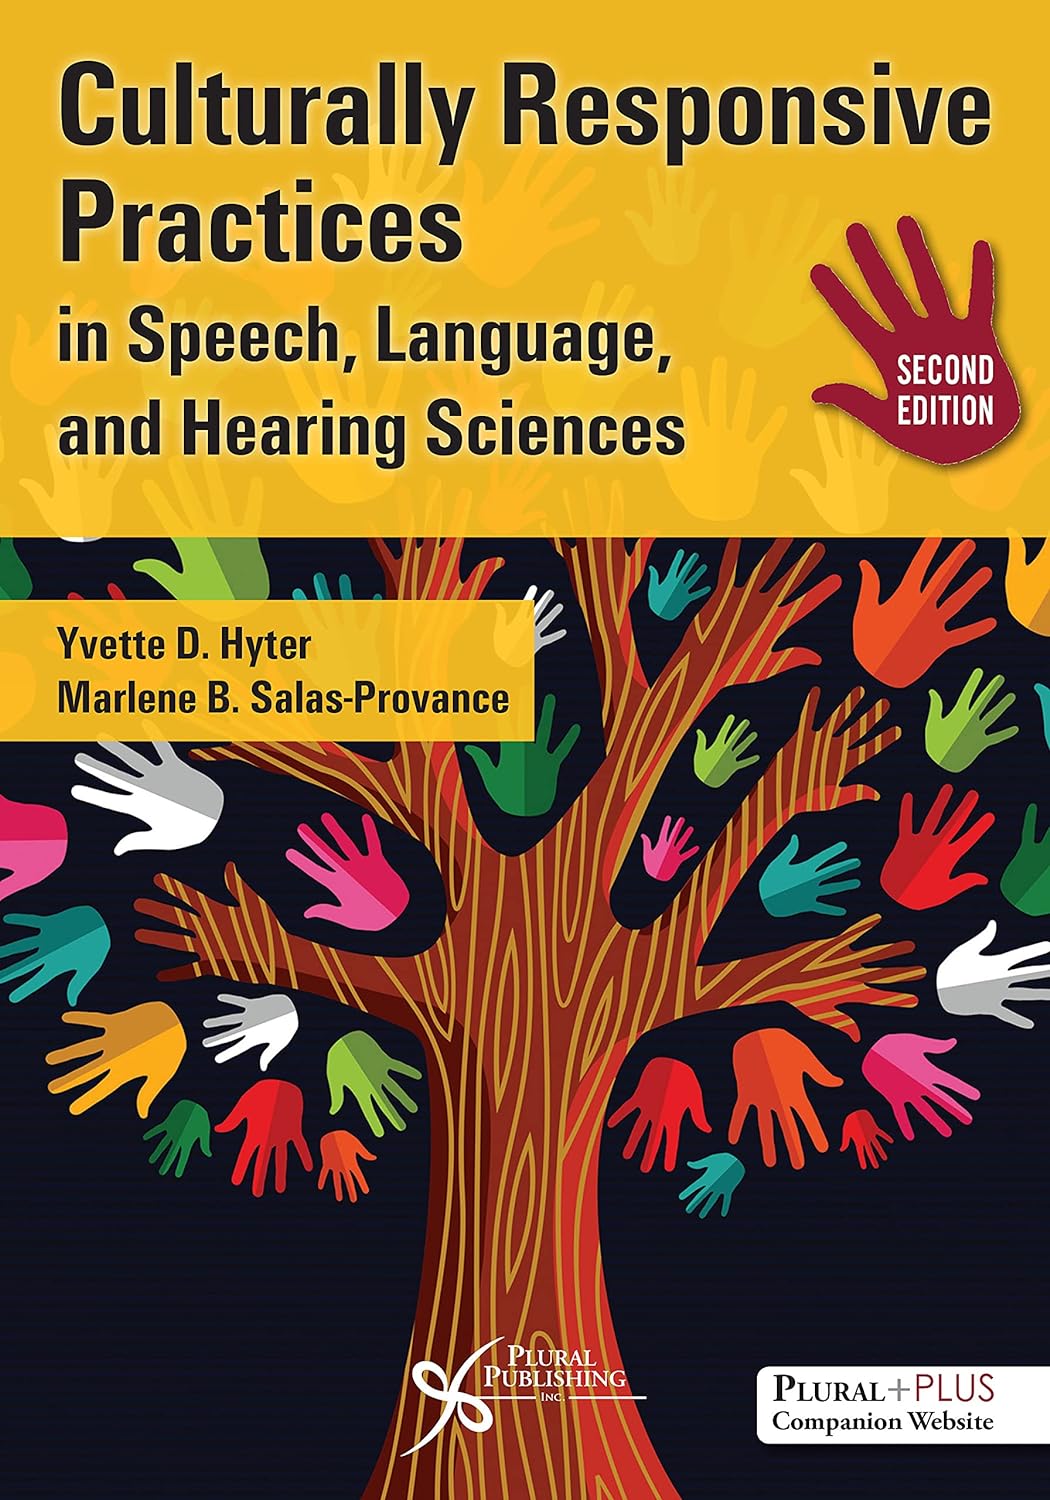 Culturally Responsive Practices in Speech, Language, and Hearing Sciences, Second Edition 2nd Edition